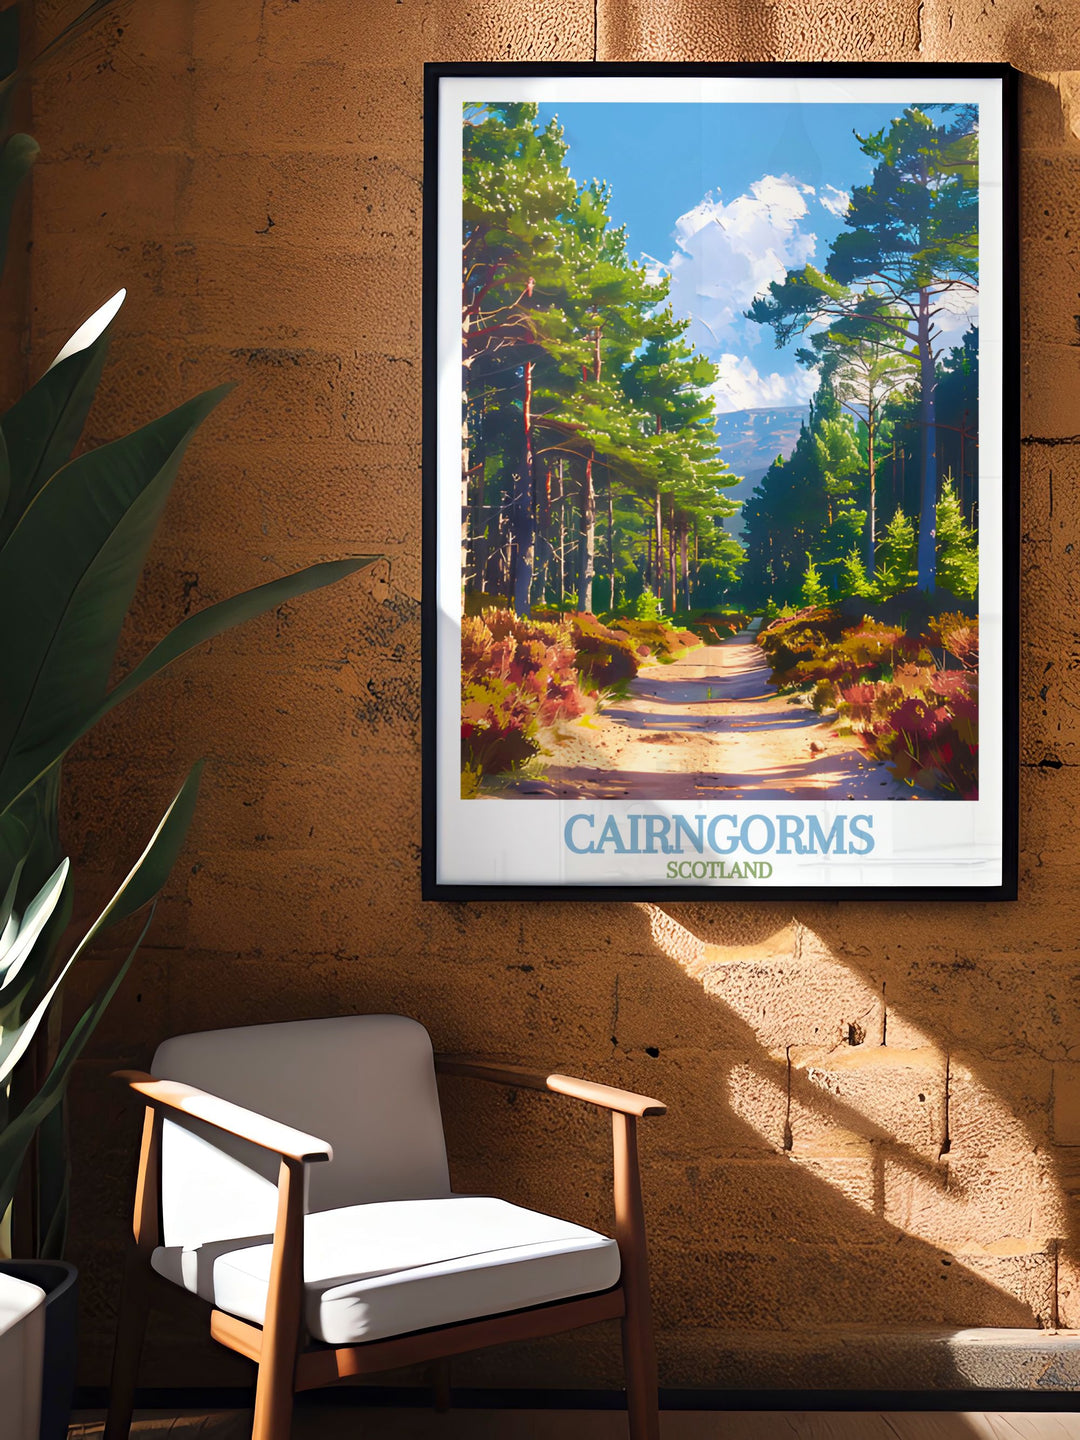 Rothiemurchus Forest vintage print capturing the timeless beauty of the Cairngorms. Perfect for adding a touch of nostalgia and natural splendor to your decor. High quality materials ensure long lasting vibrant colors and detailed artwork.